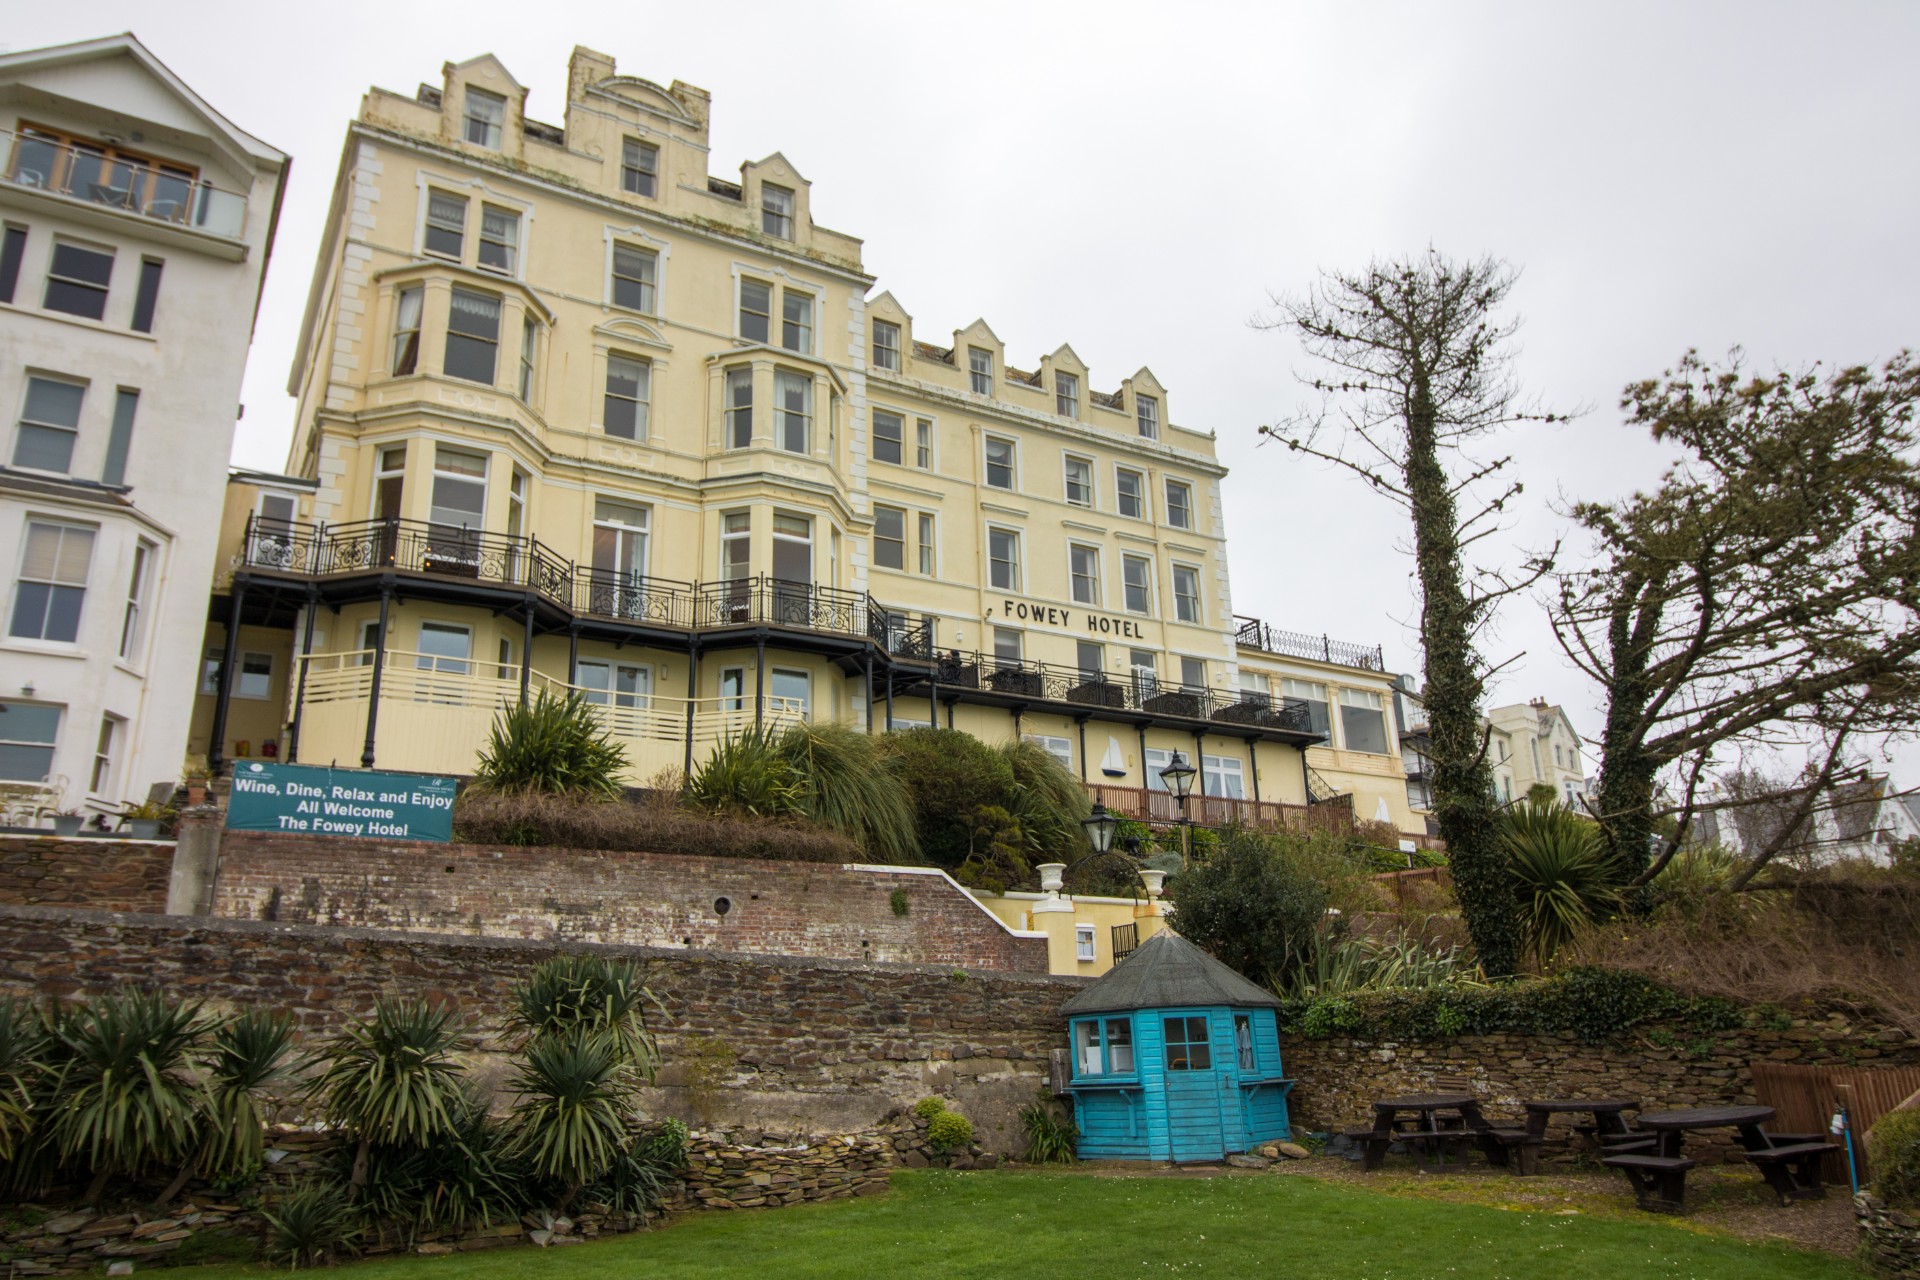 The perfect seaside staycation in Fowey, Cornwall, at the famous Fowey Hotel, with trips to The Eden Project and The Lost Gardens of Heligan! Click through to read more...